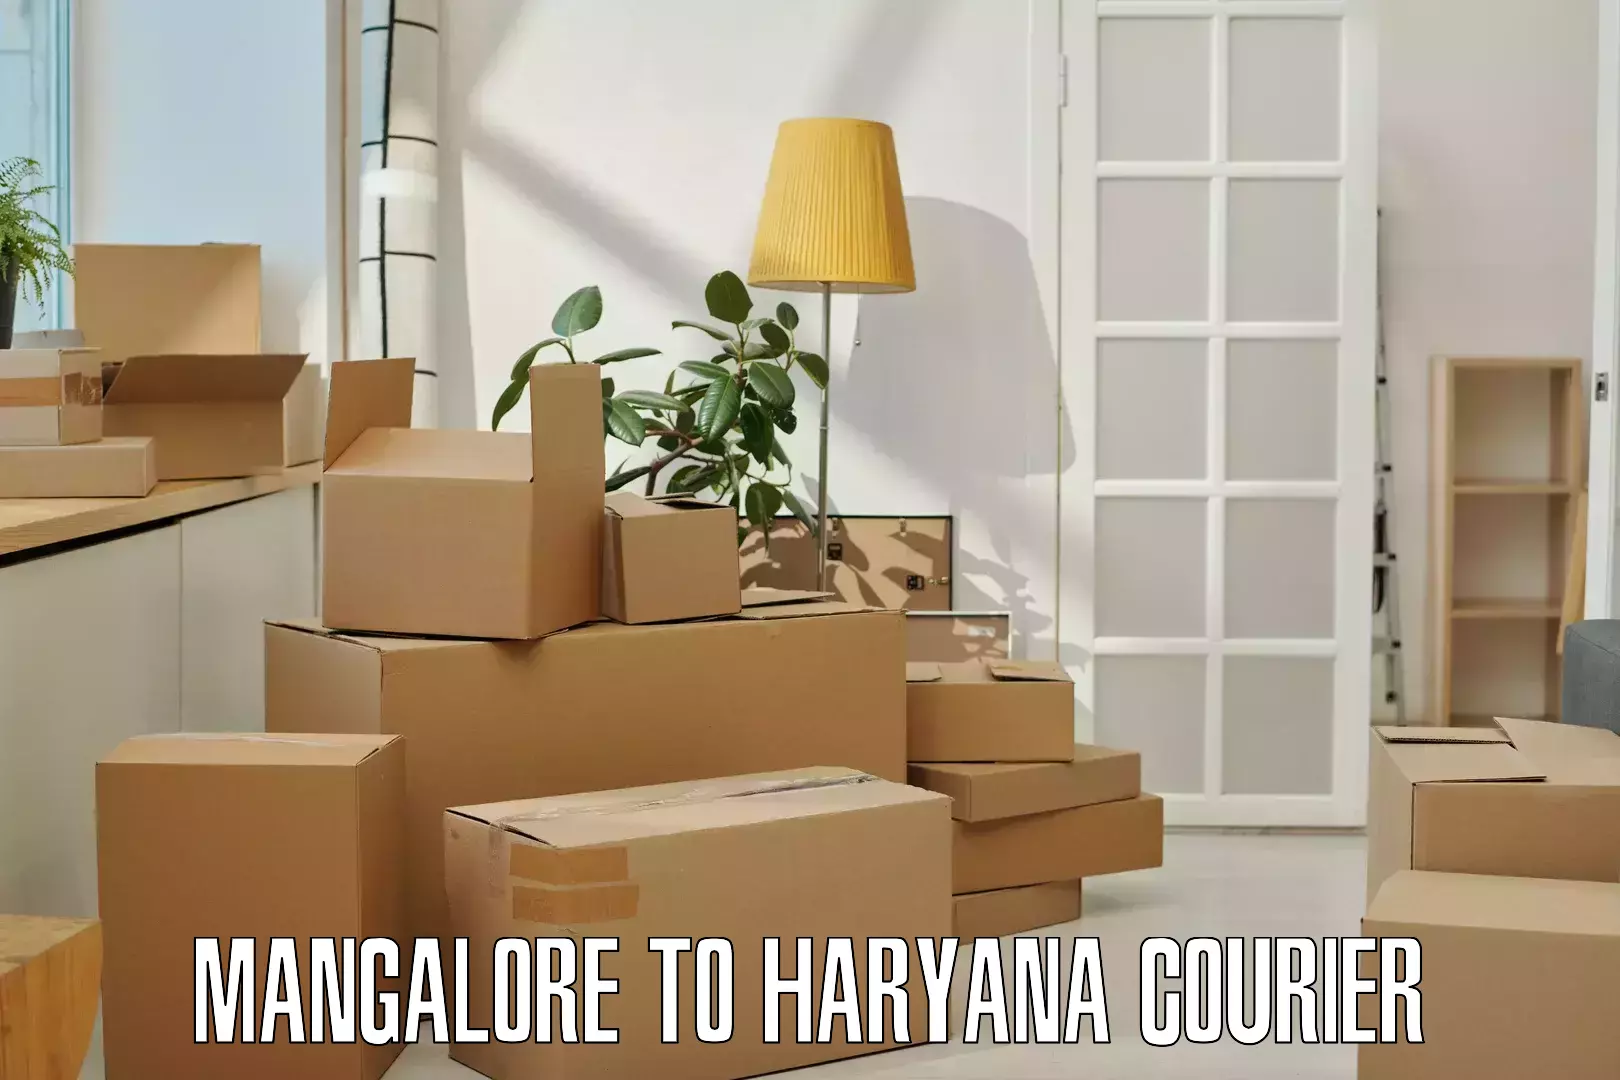 Enhanced tracking features Mangalore to NCR Haryana